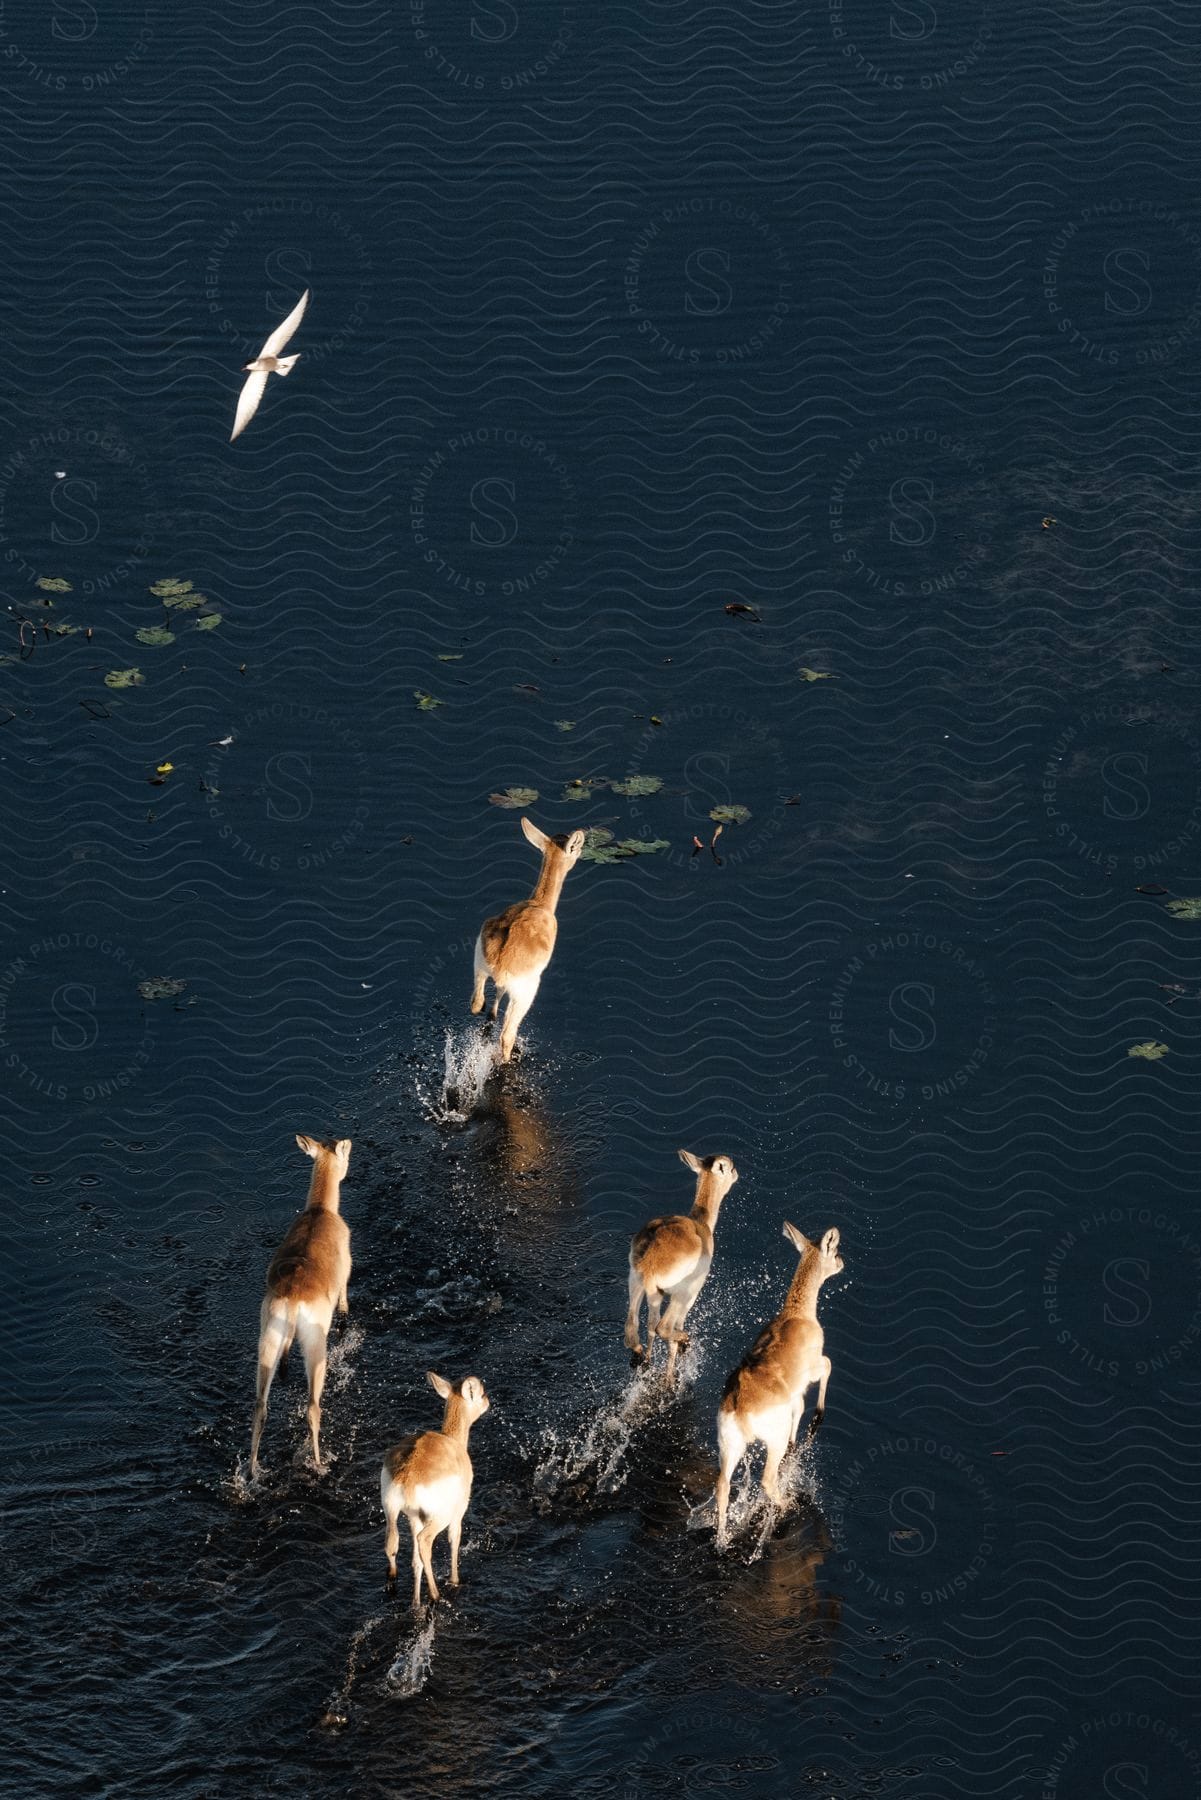 A graceful heron soars above as a herd of deer daintily traverses a shimmering pond